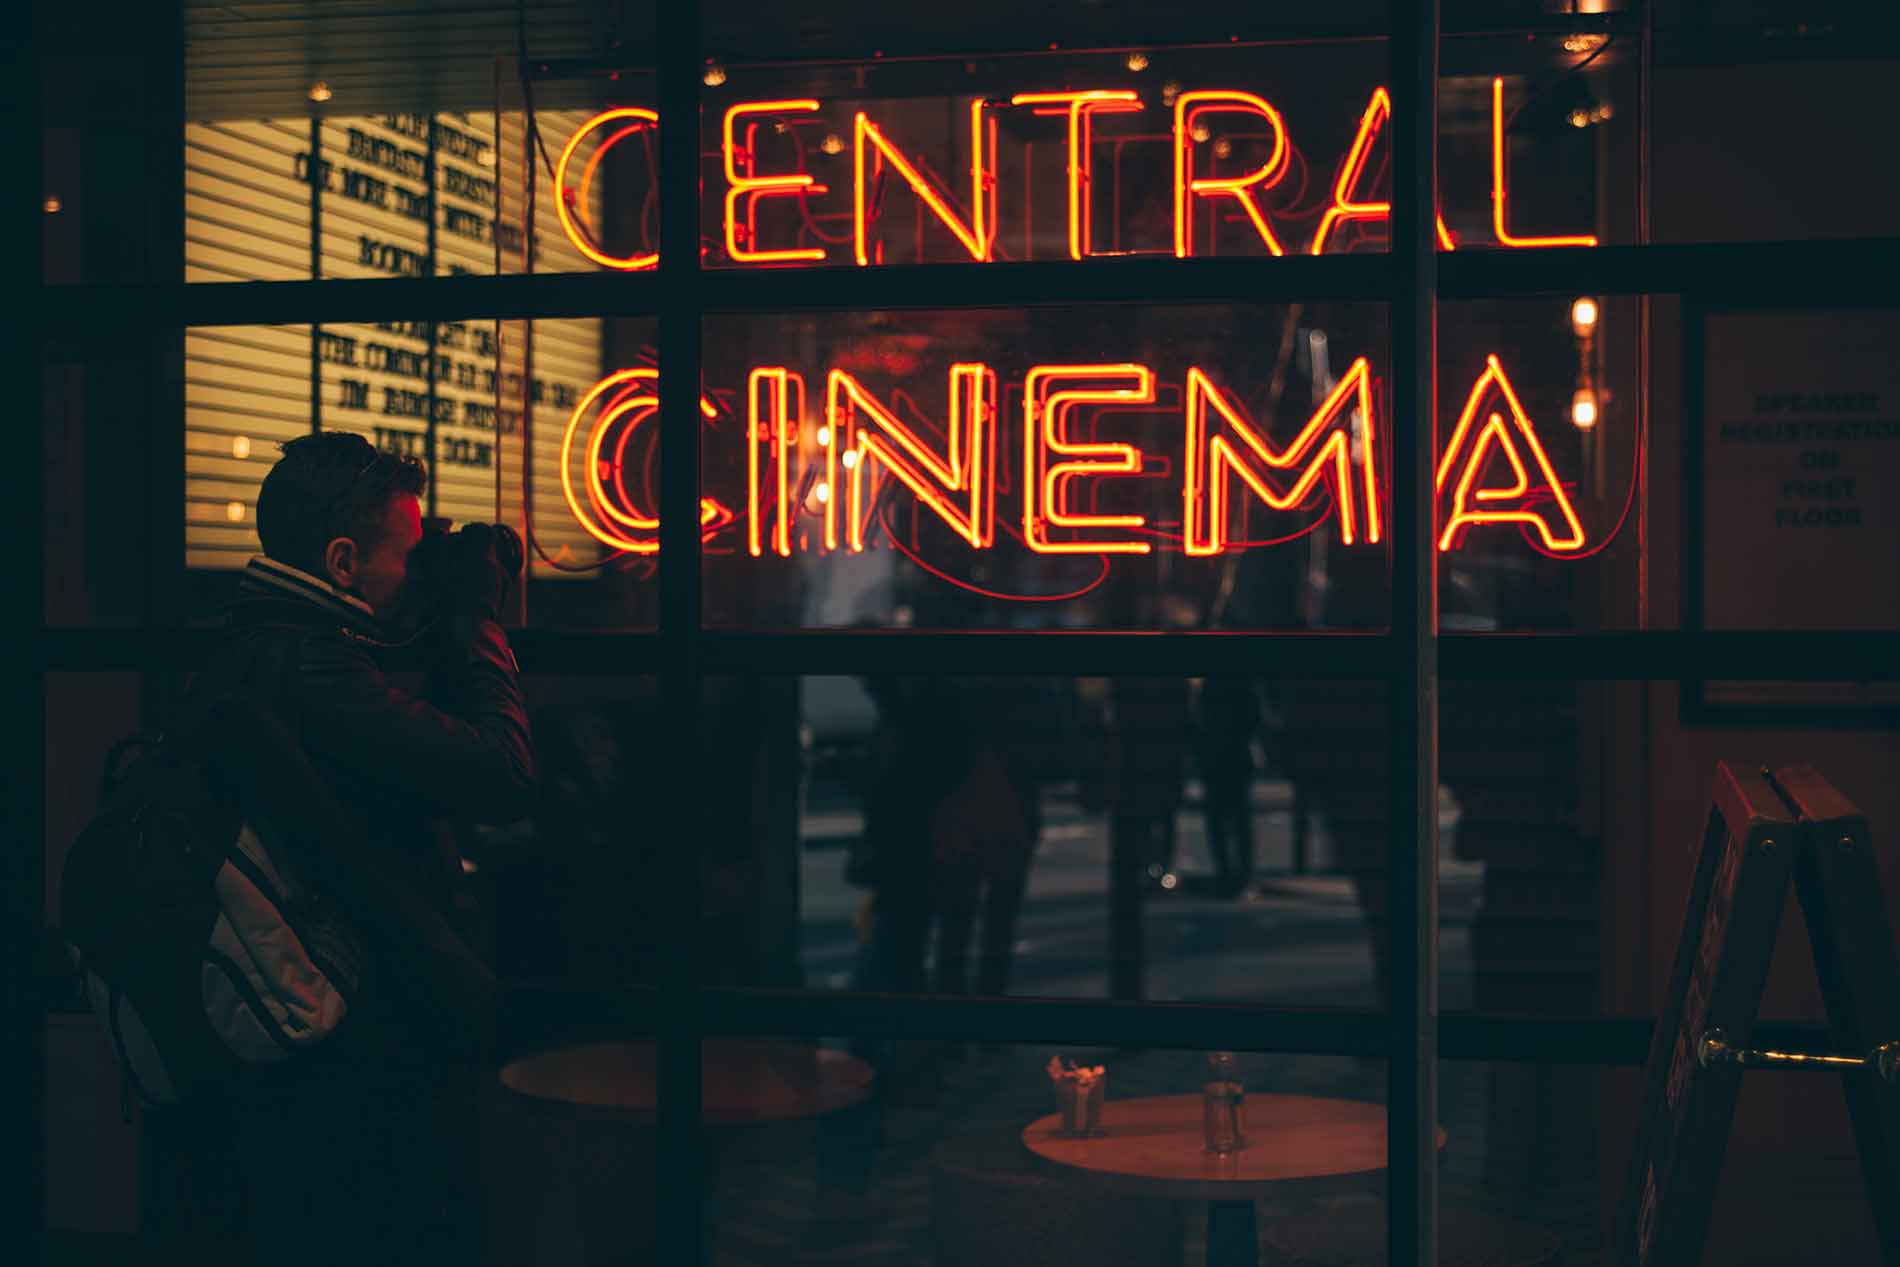 A person taking a picture of a cafe window which has a neon sign saying 'CENTRAL CINEMA'